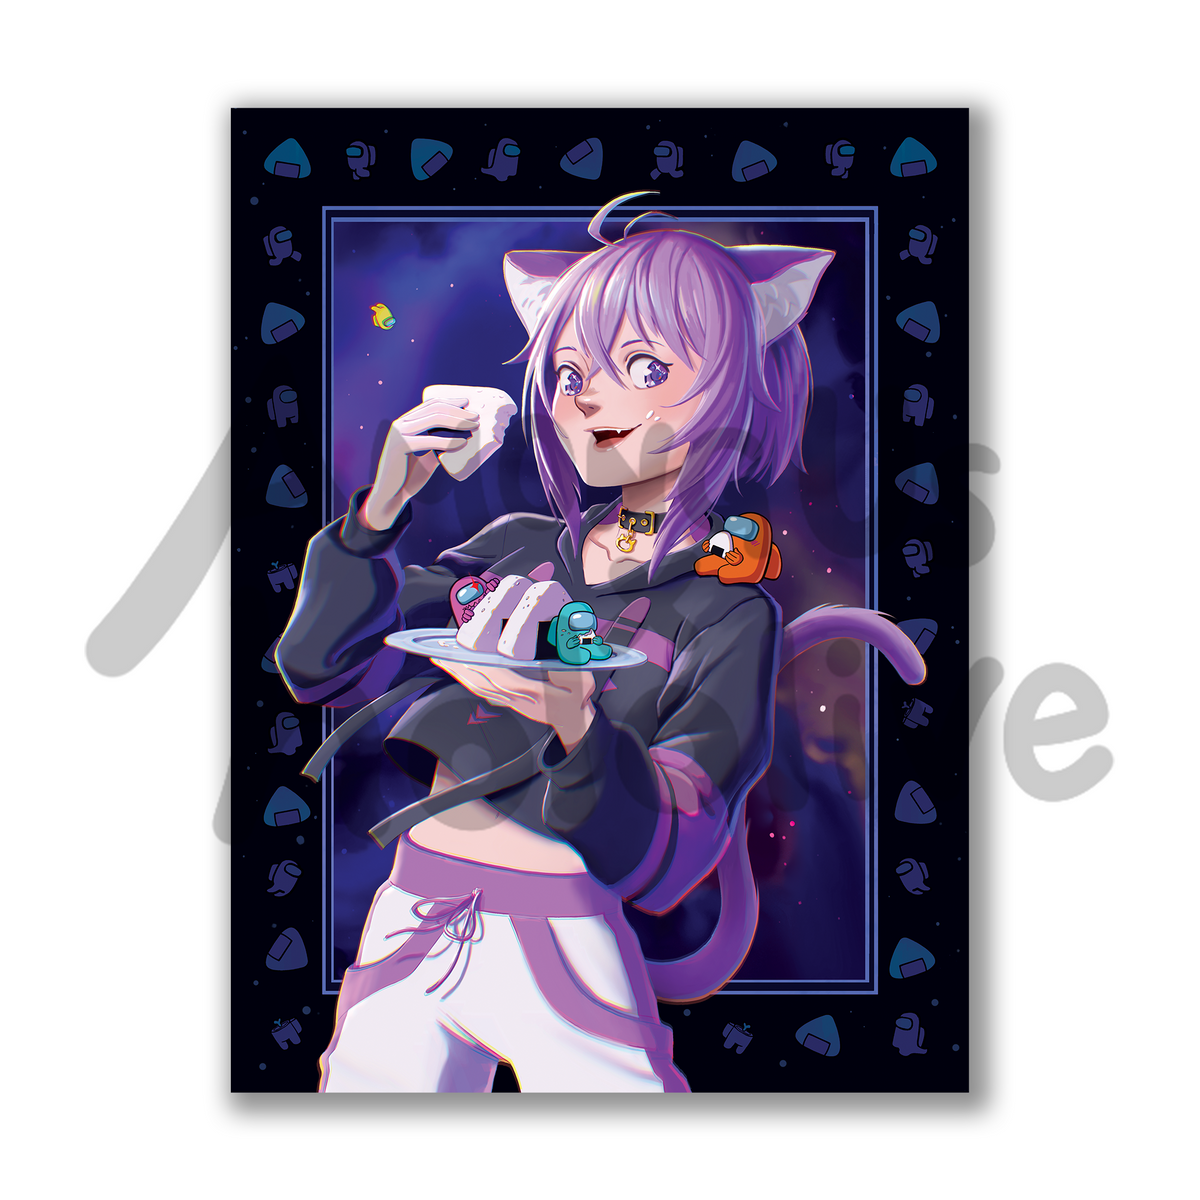 A poster of Nekomata Okayu from Hololive standing and eating from a plate of onigiri. Three tiny crewmates enjoy the snack with her either directly from the plate, but one orange crewmate enjoys its onigiri from atop her shoulder.